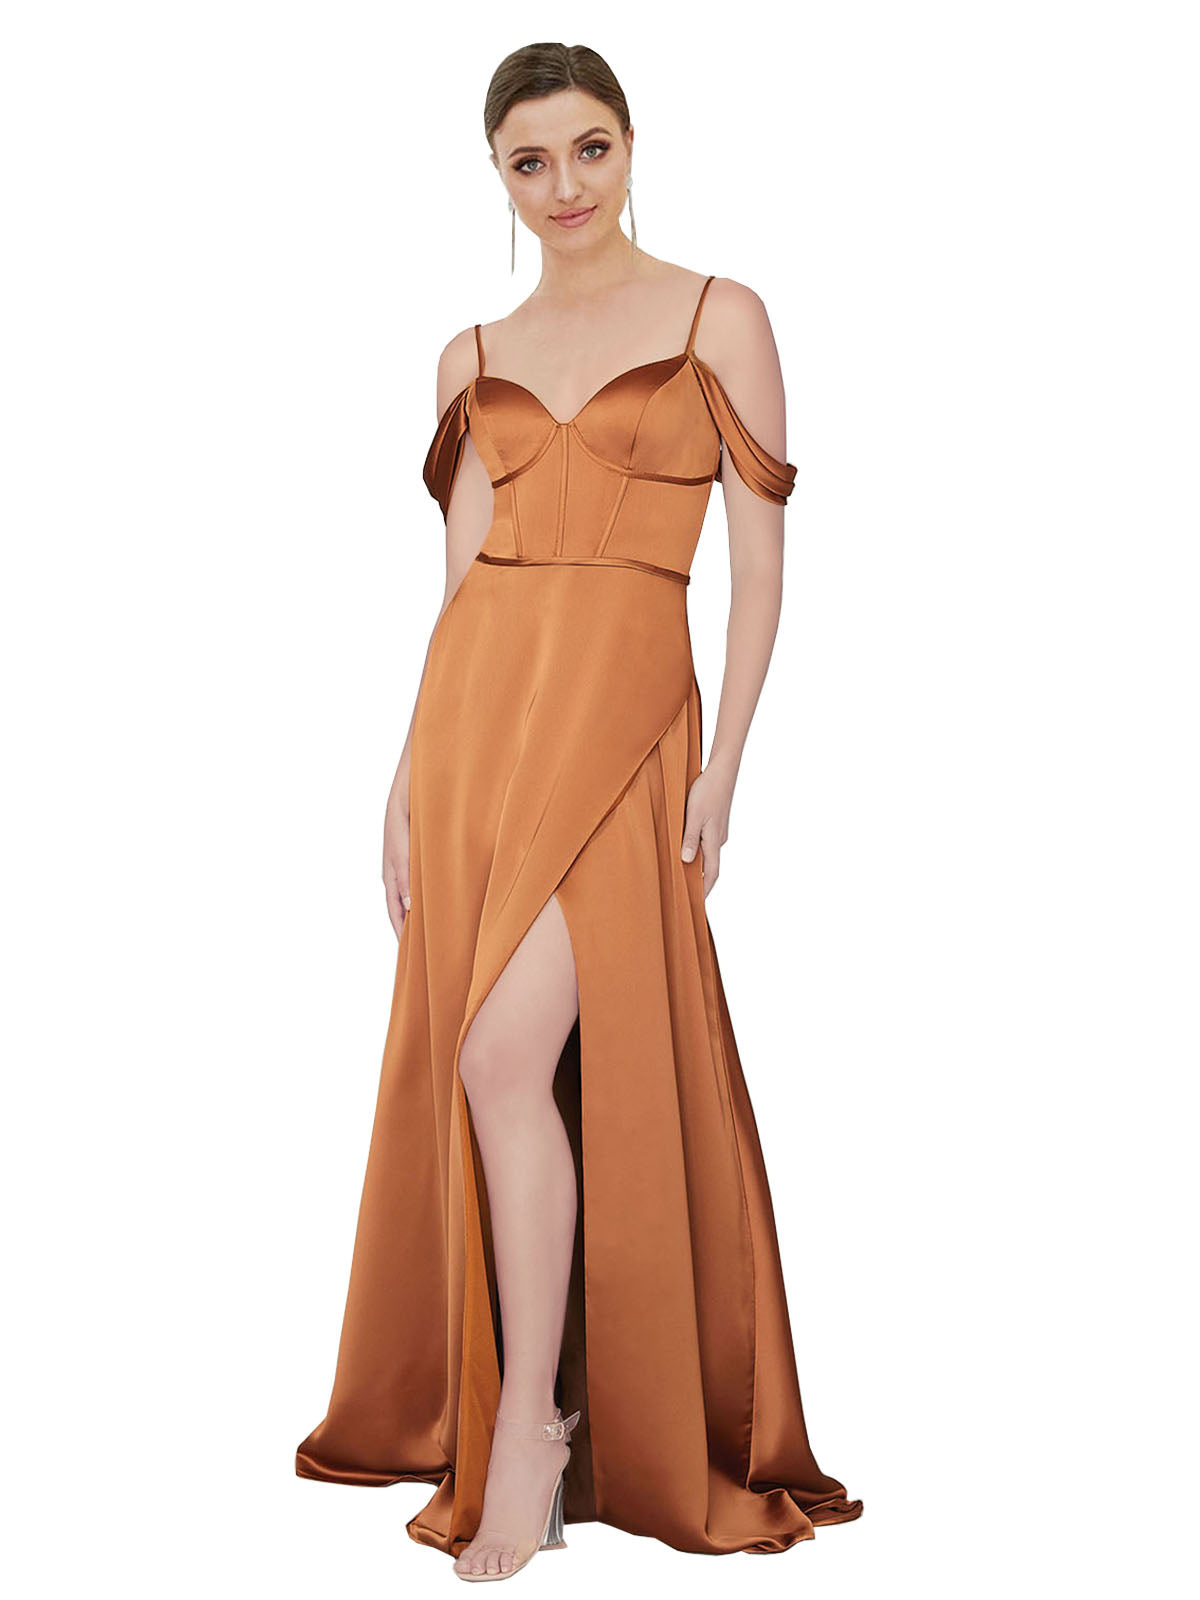 RightBrides Lianne Orange A-Line Sweetheart Spaghetti Straps Cold Shoulder Off the Shoulder Long Silky Satin Bridesmaid Dress